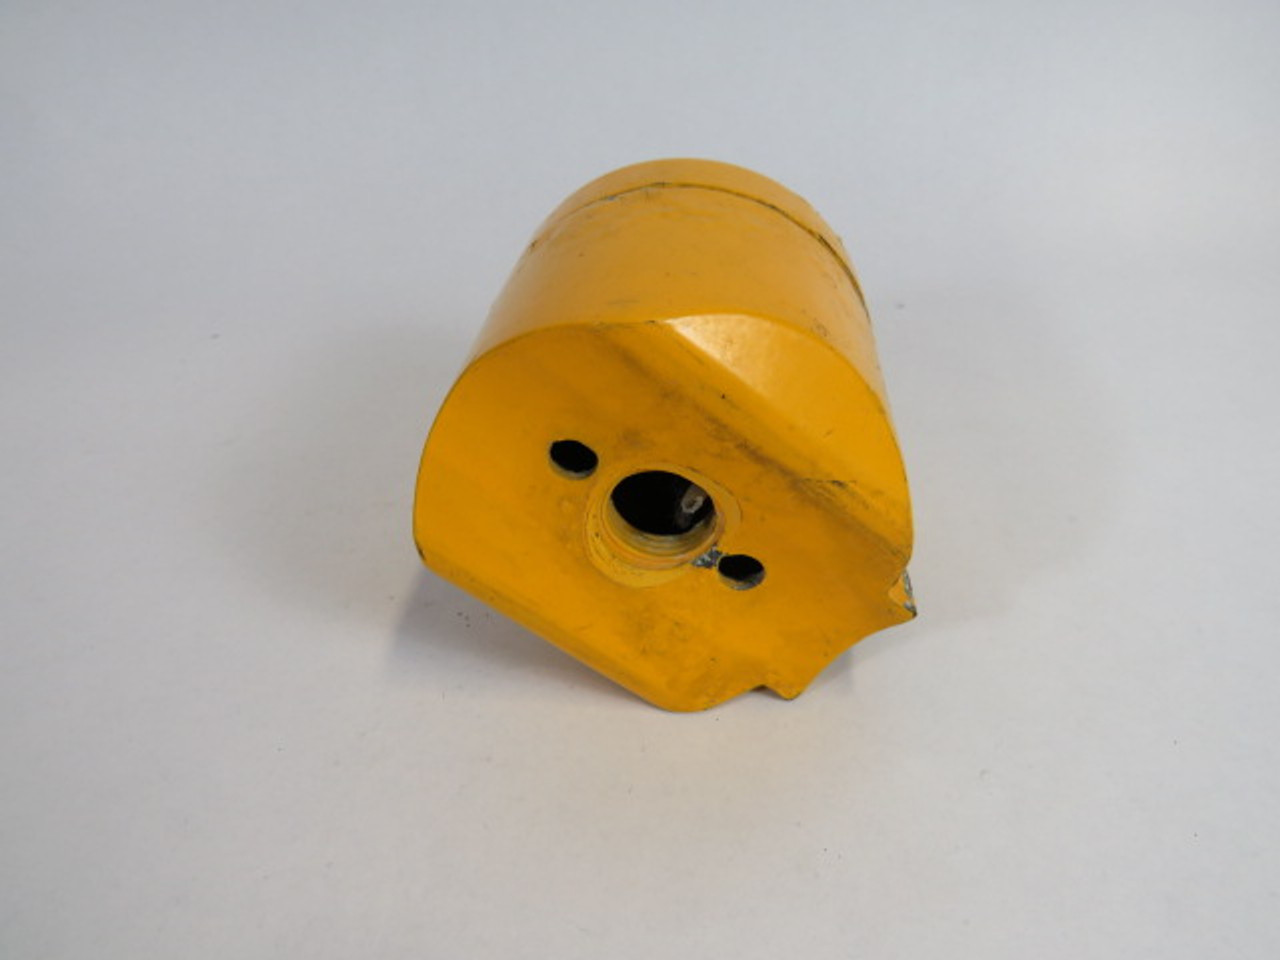 GTE Corp. PB-3-1000 Yellow Pedestrian Push Button USED